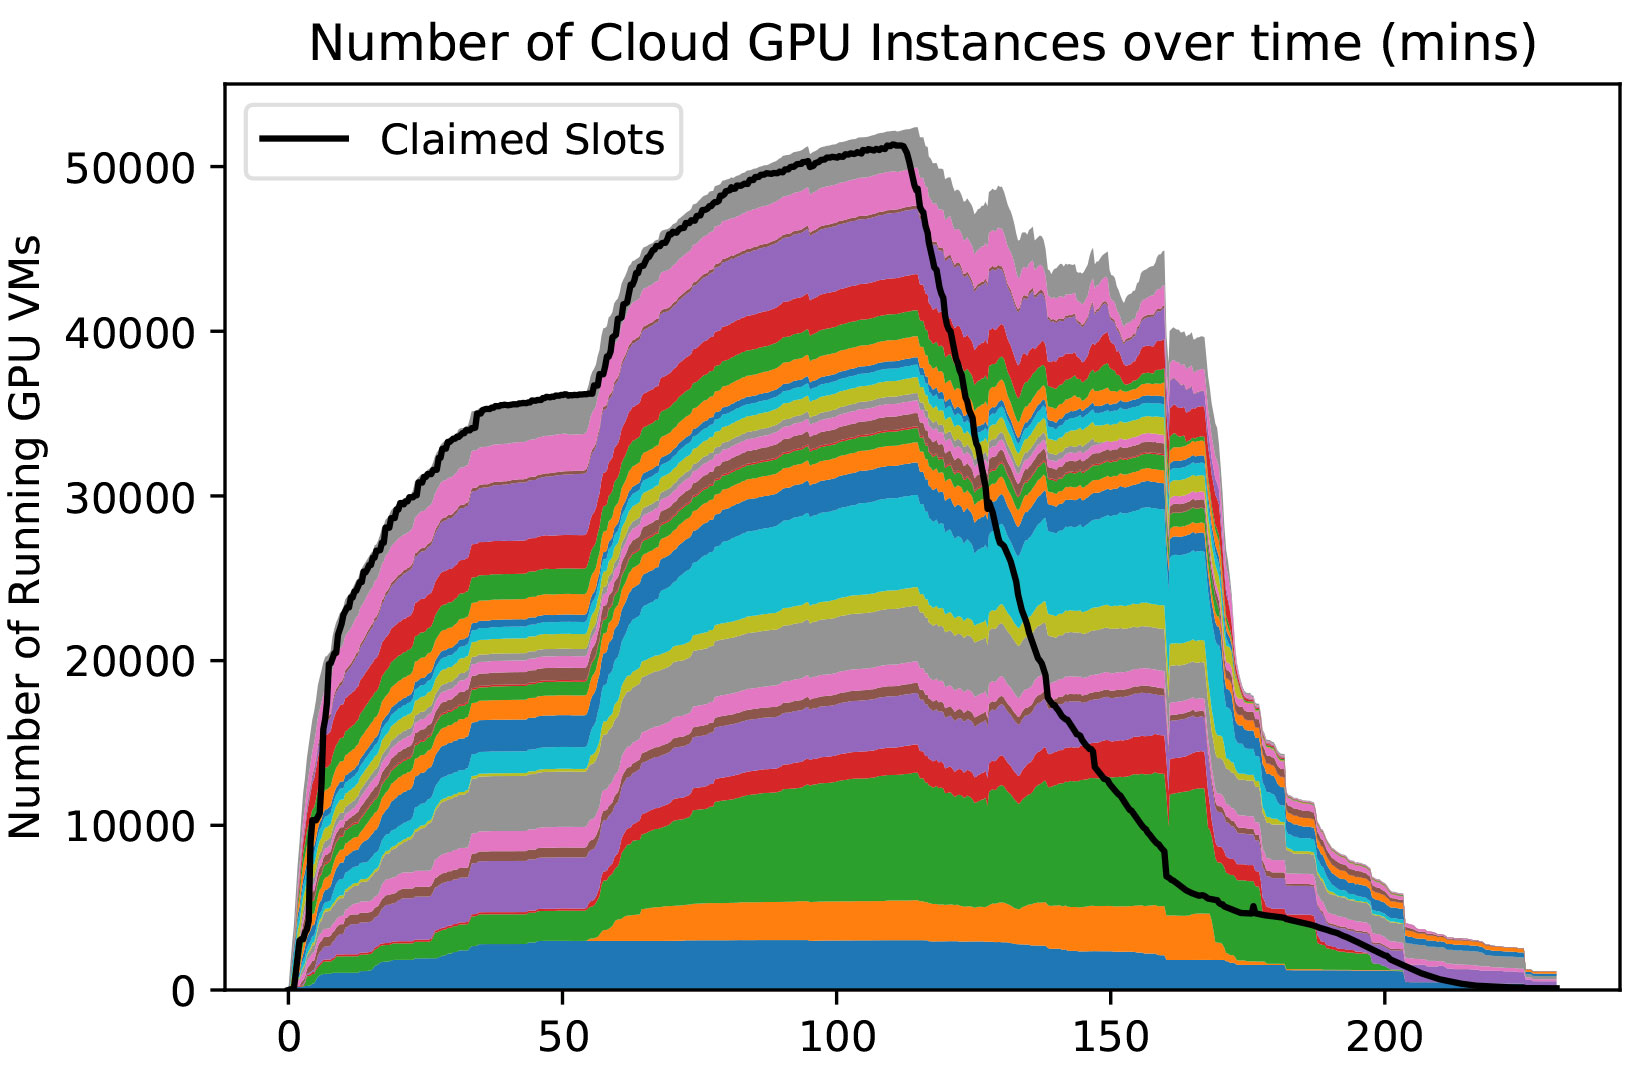 Number of Cloud GPU Instances over time